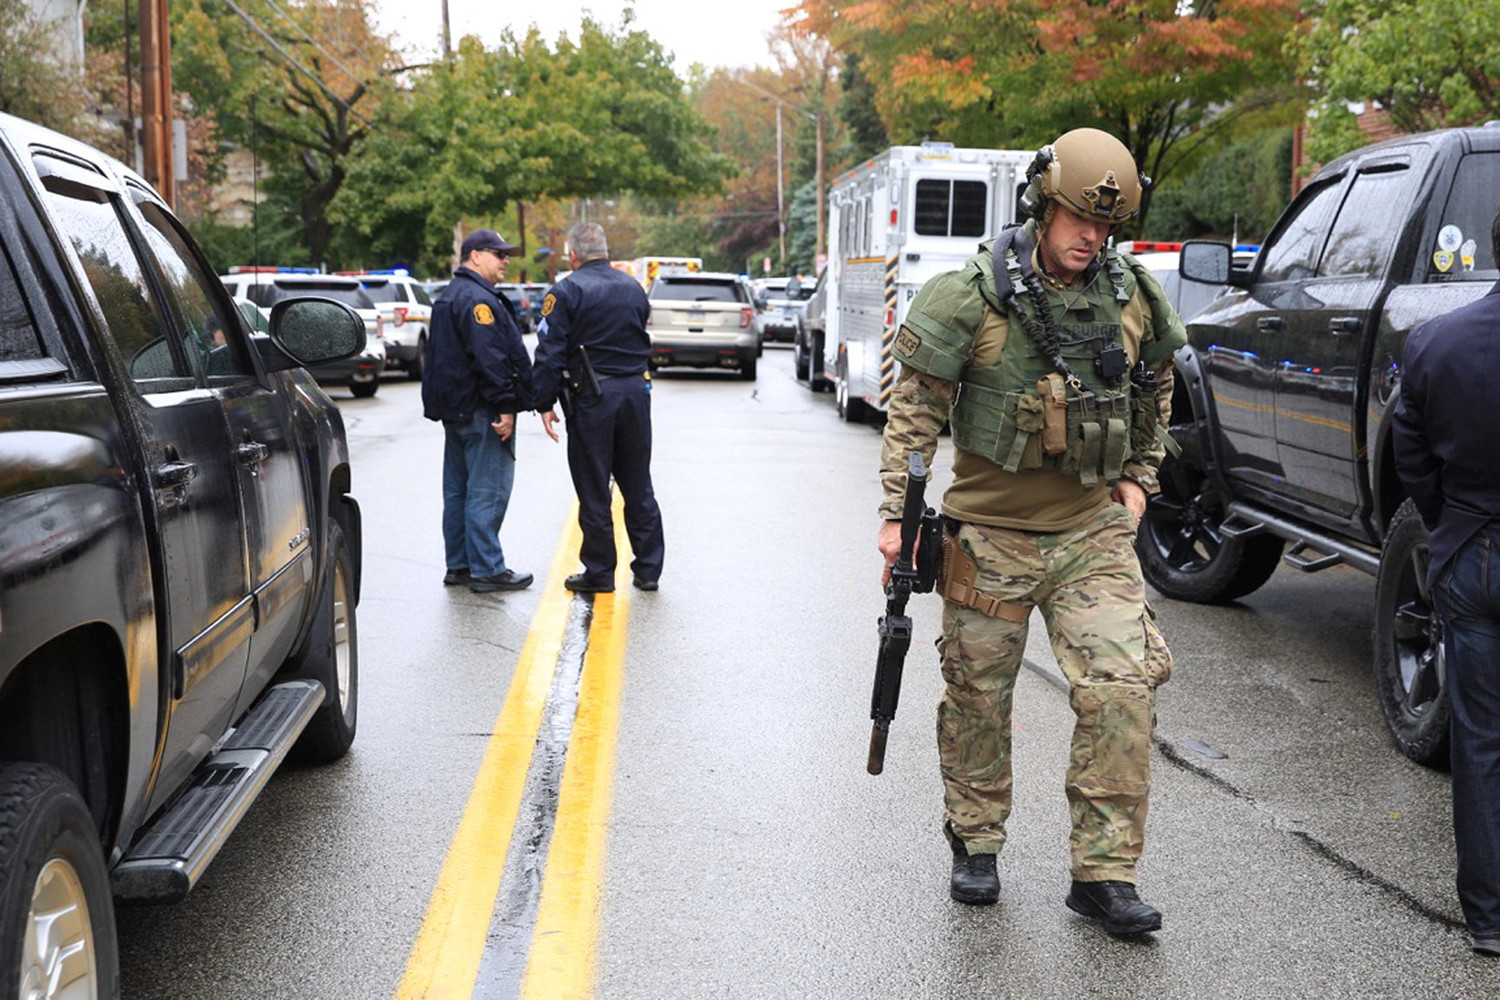 A SWAT police officer and other first responders are seen Oct. 27 after a gunman killed at least four people at the Tree of Life Synagogue in Pittsburgh. Robert Bowers opened fire that morning during a service at the synagogue, also wounding at least six others, including four police officers, authorities said.